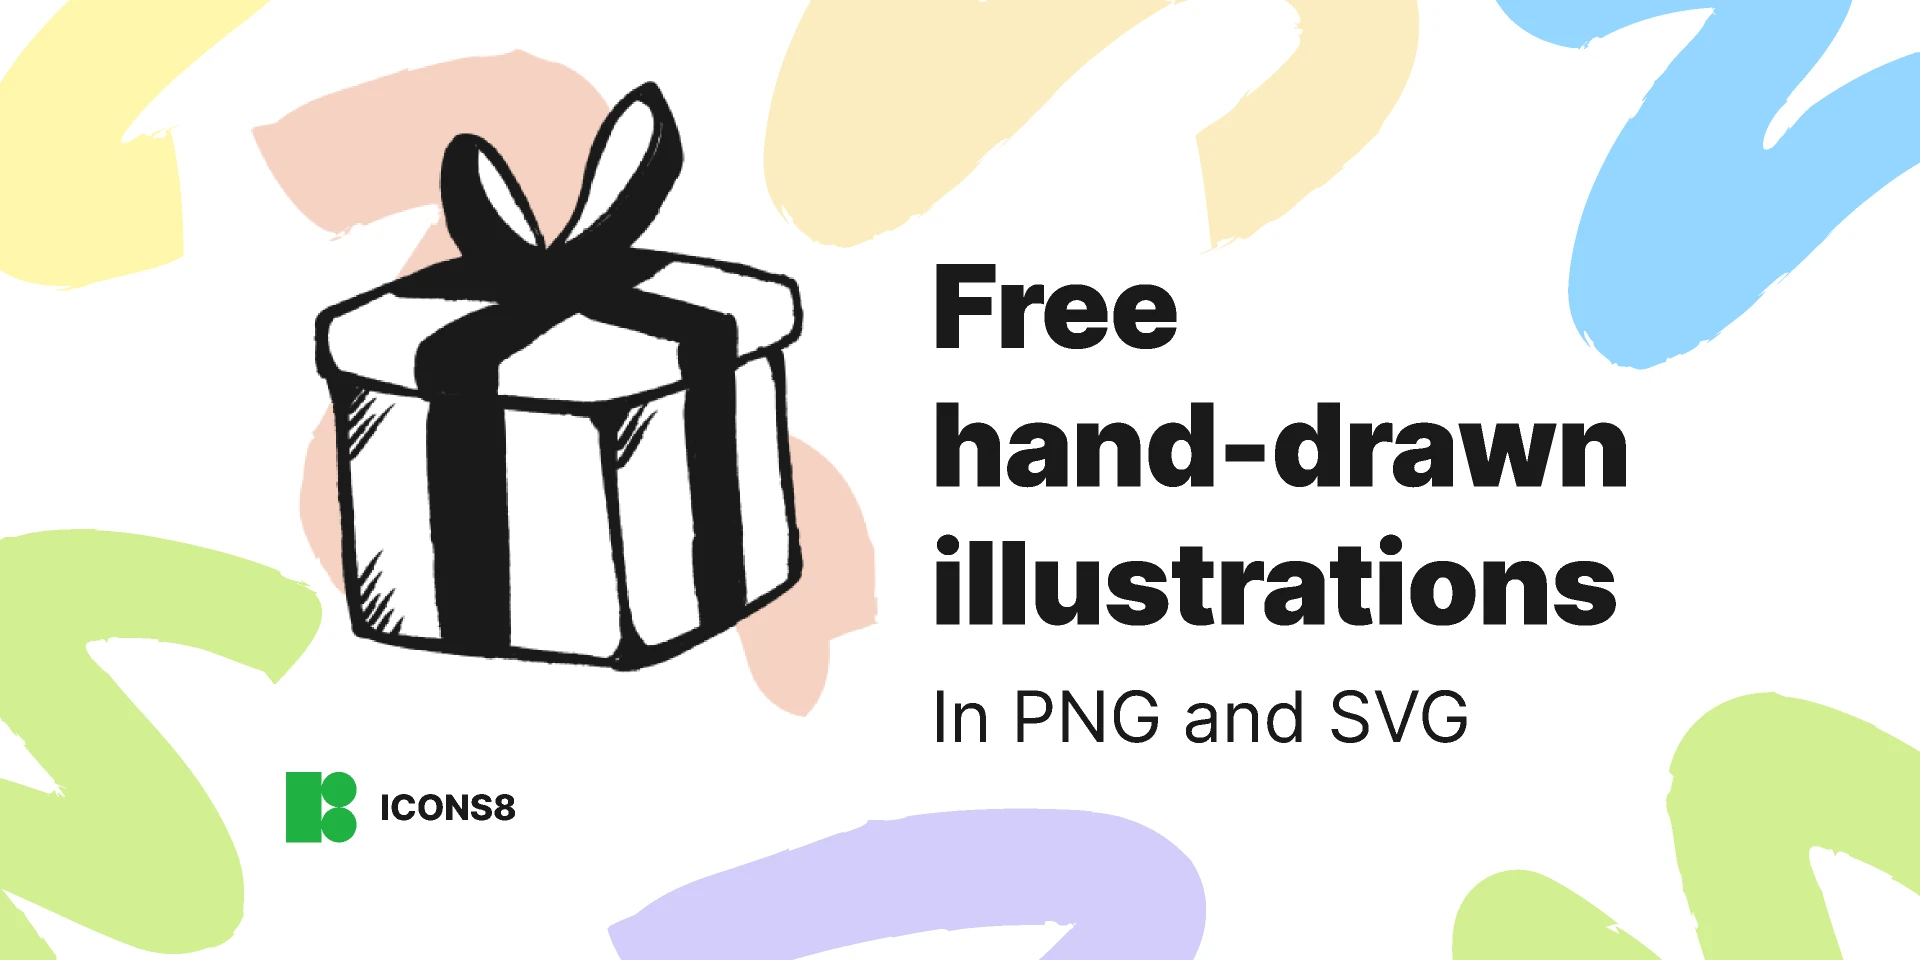 Free hand-drawn illustrations in PNG and SVG for Figma and Adobe XD